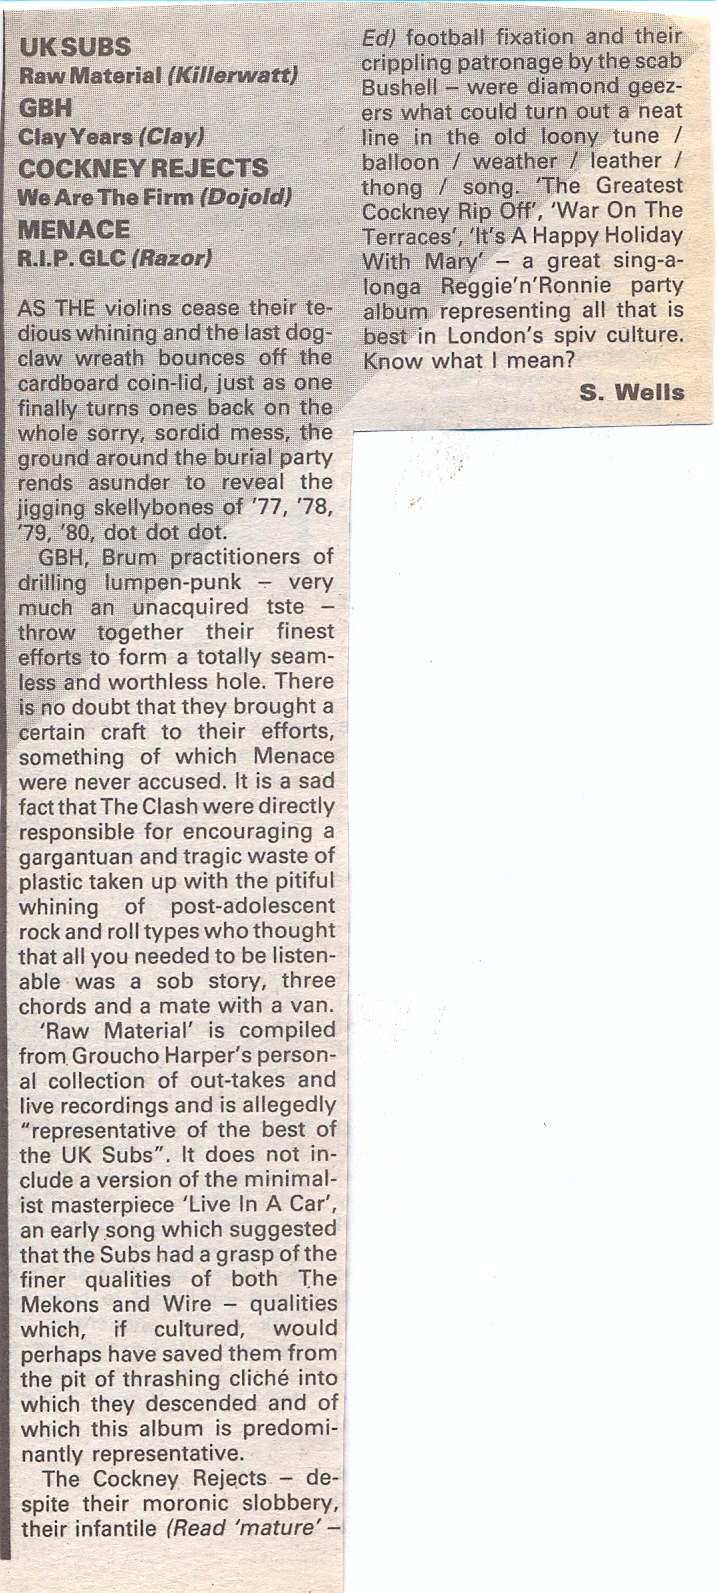 raw_material_review_nme_19th_july_86.jpg